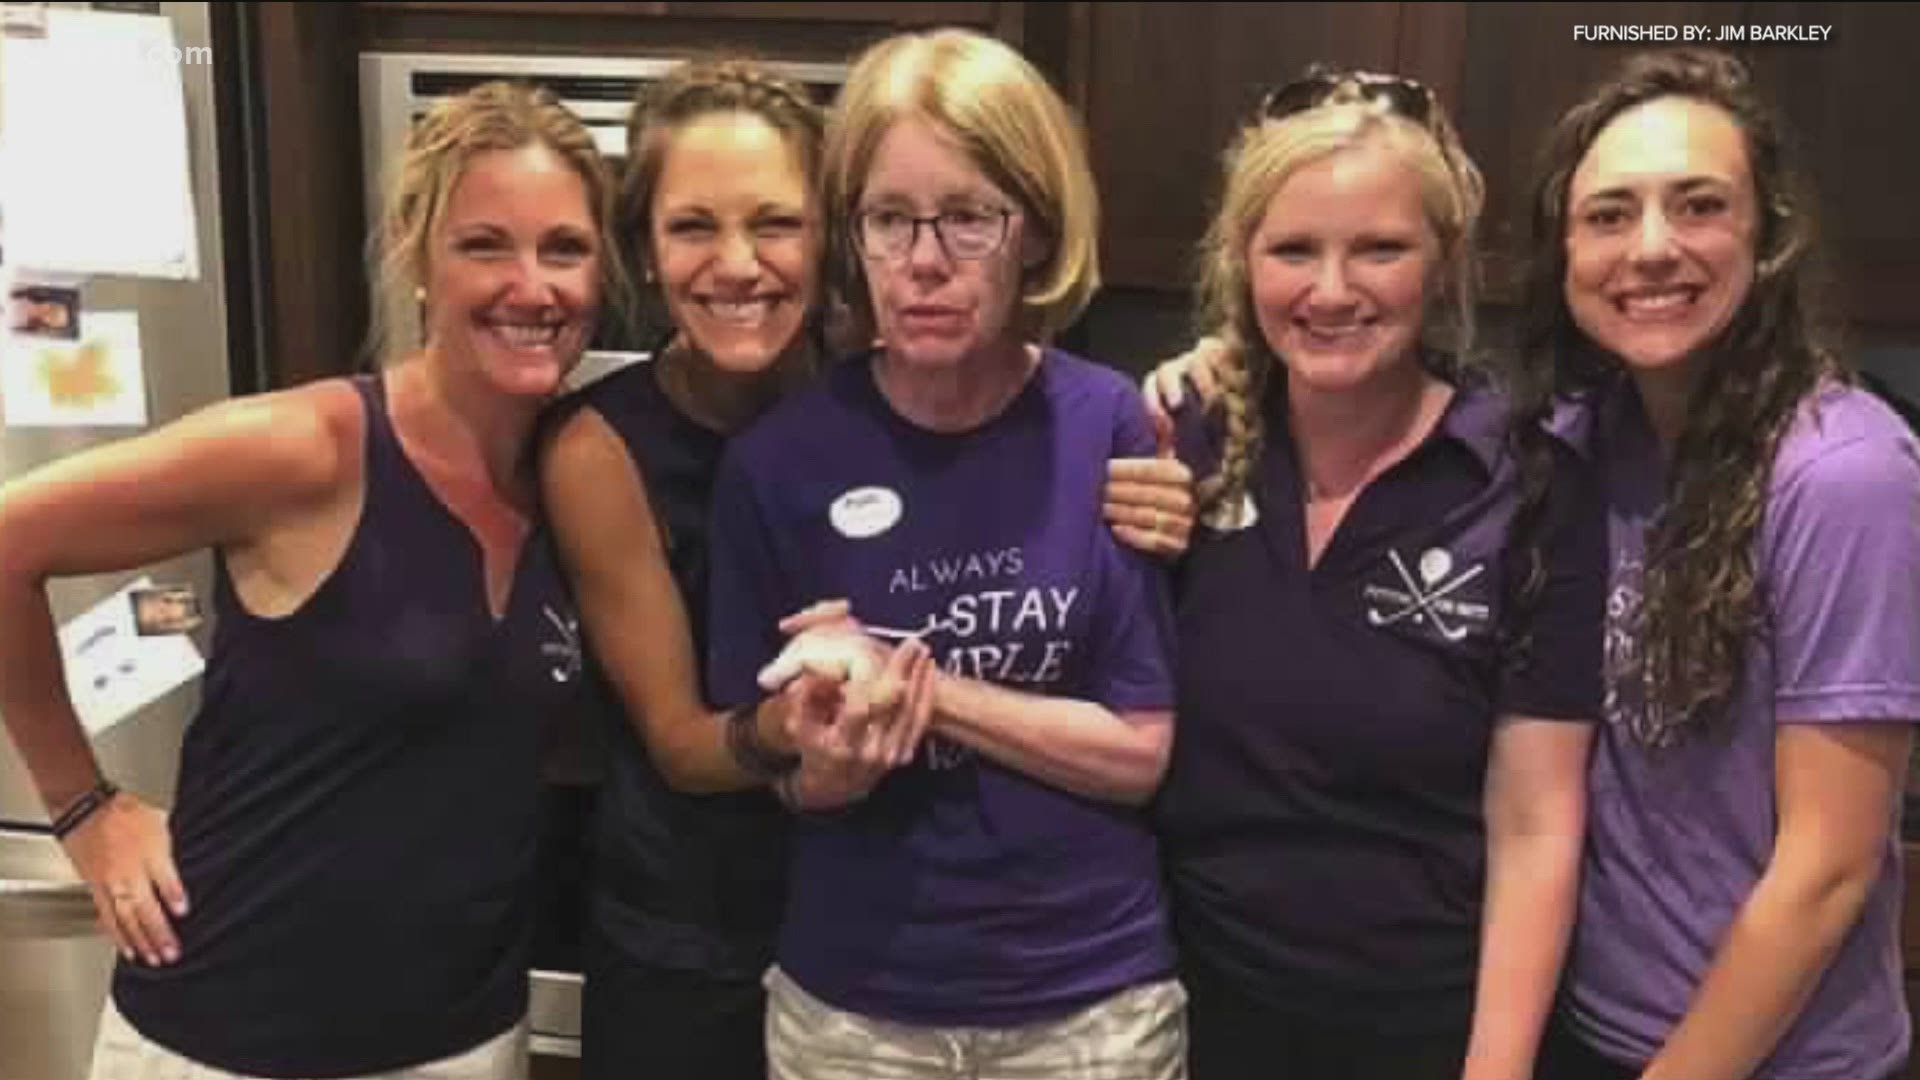 Alzheimer's takes a lot from a family. The Schommers know that too well, but now, they're hoping to give back to those who have also been affected